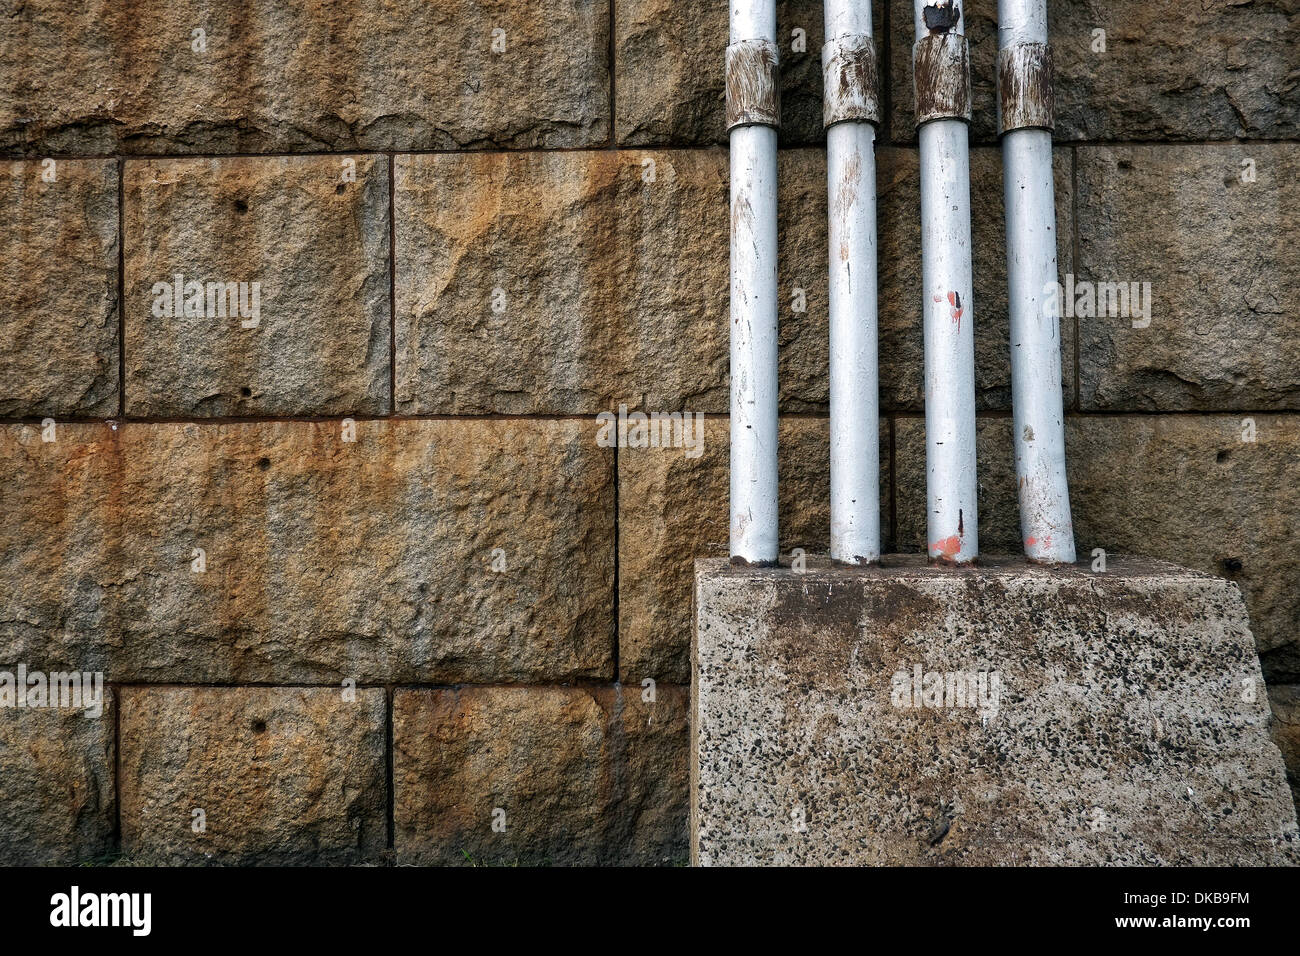 Pipes embedded in a concrete block against a stone wall. Stock Photo